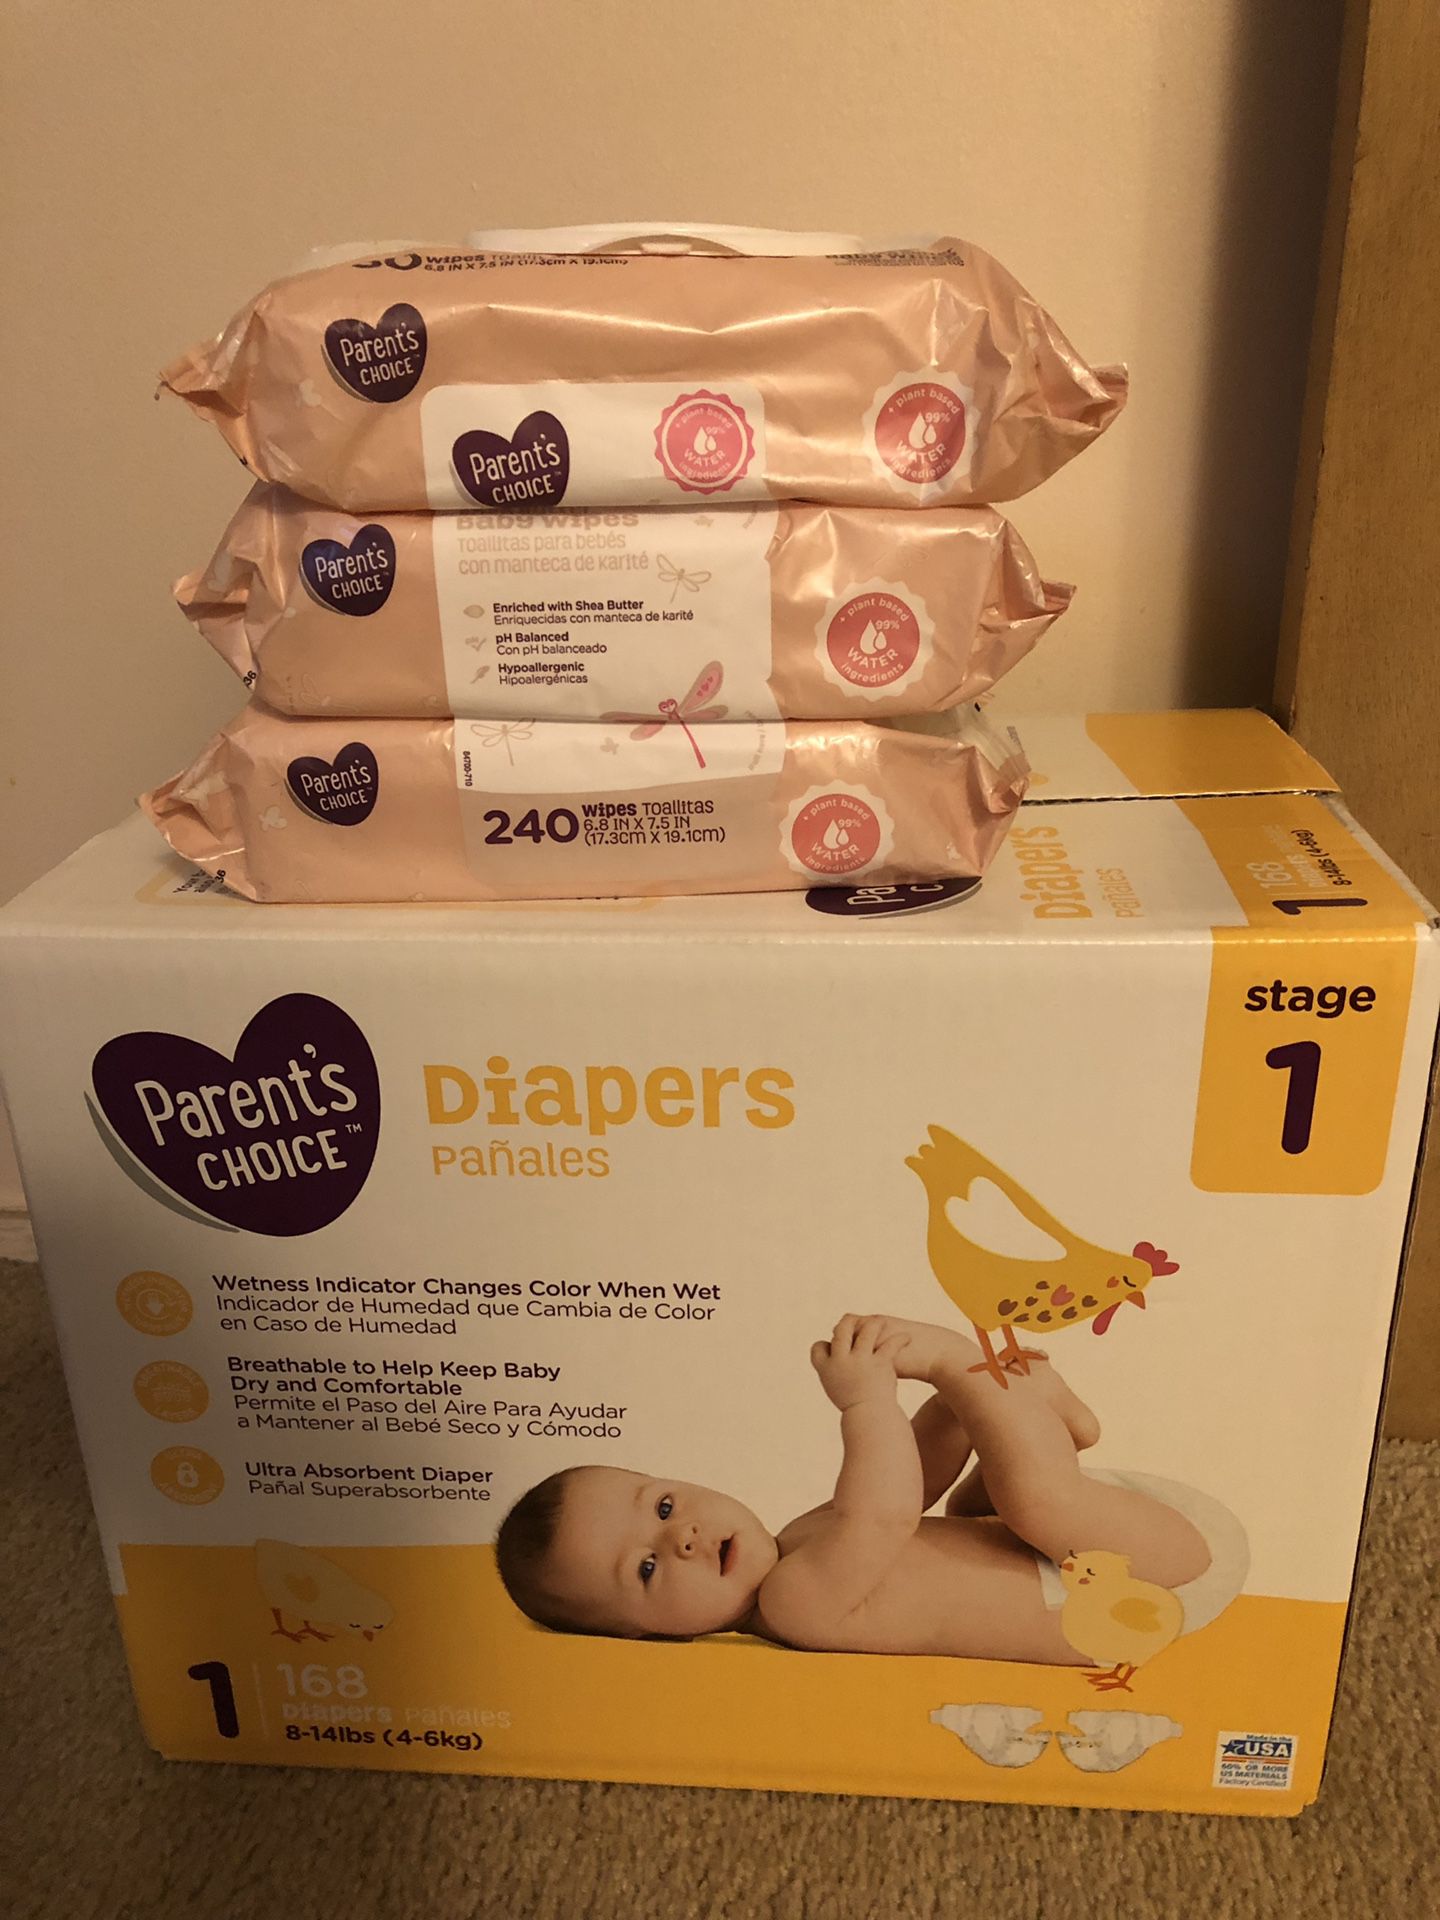 Parent’s choice diapers and wipes